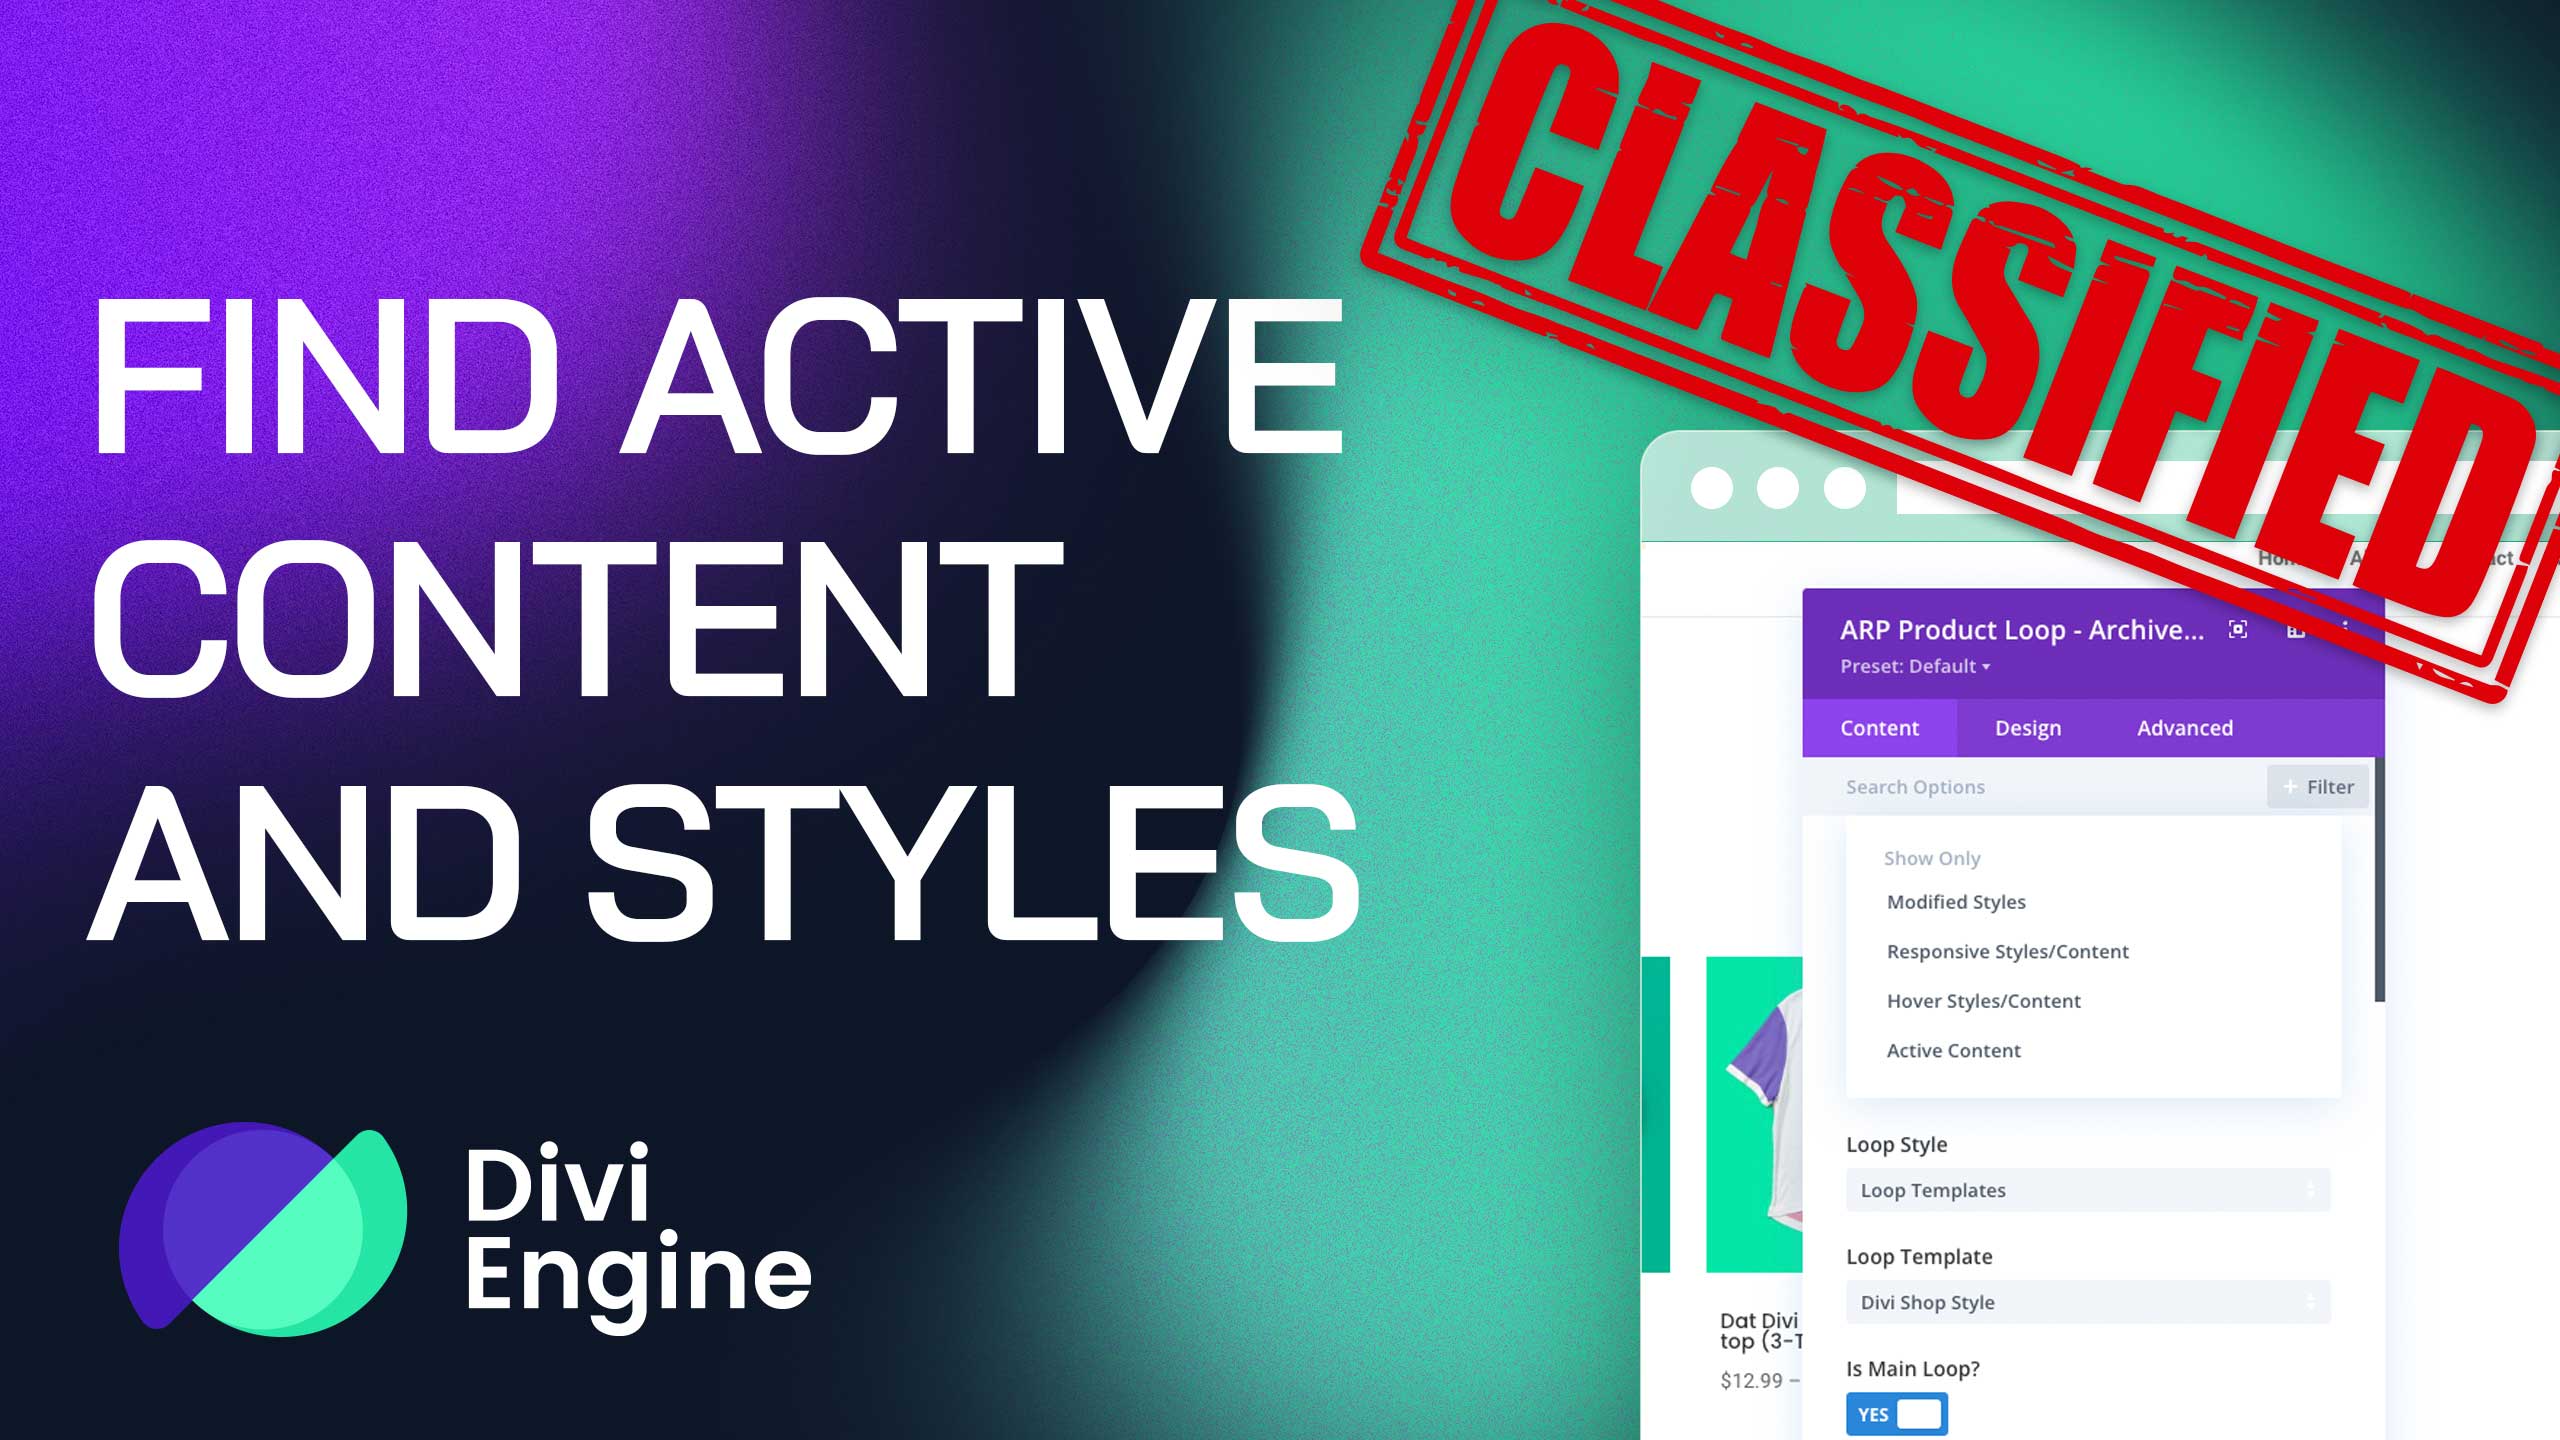 Divi Secret Features Tutorial - Finding Active Content and Styles in the Divi Builder